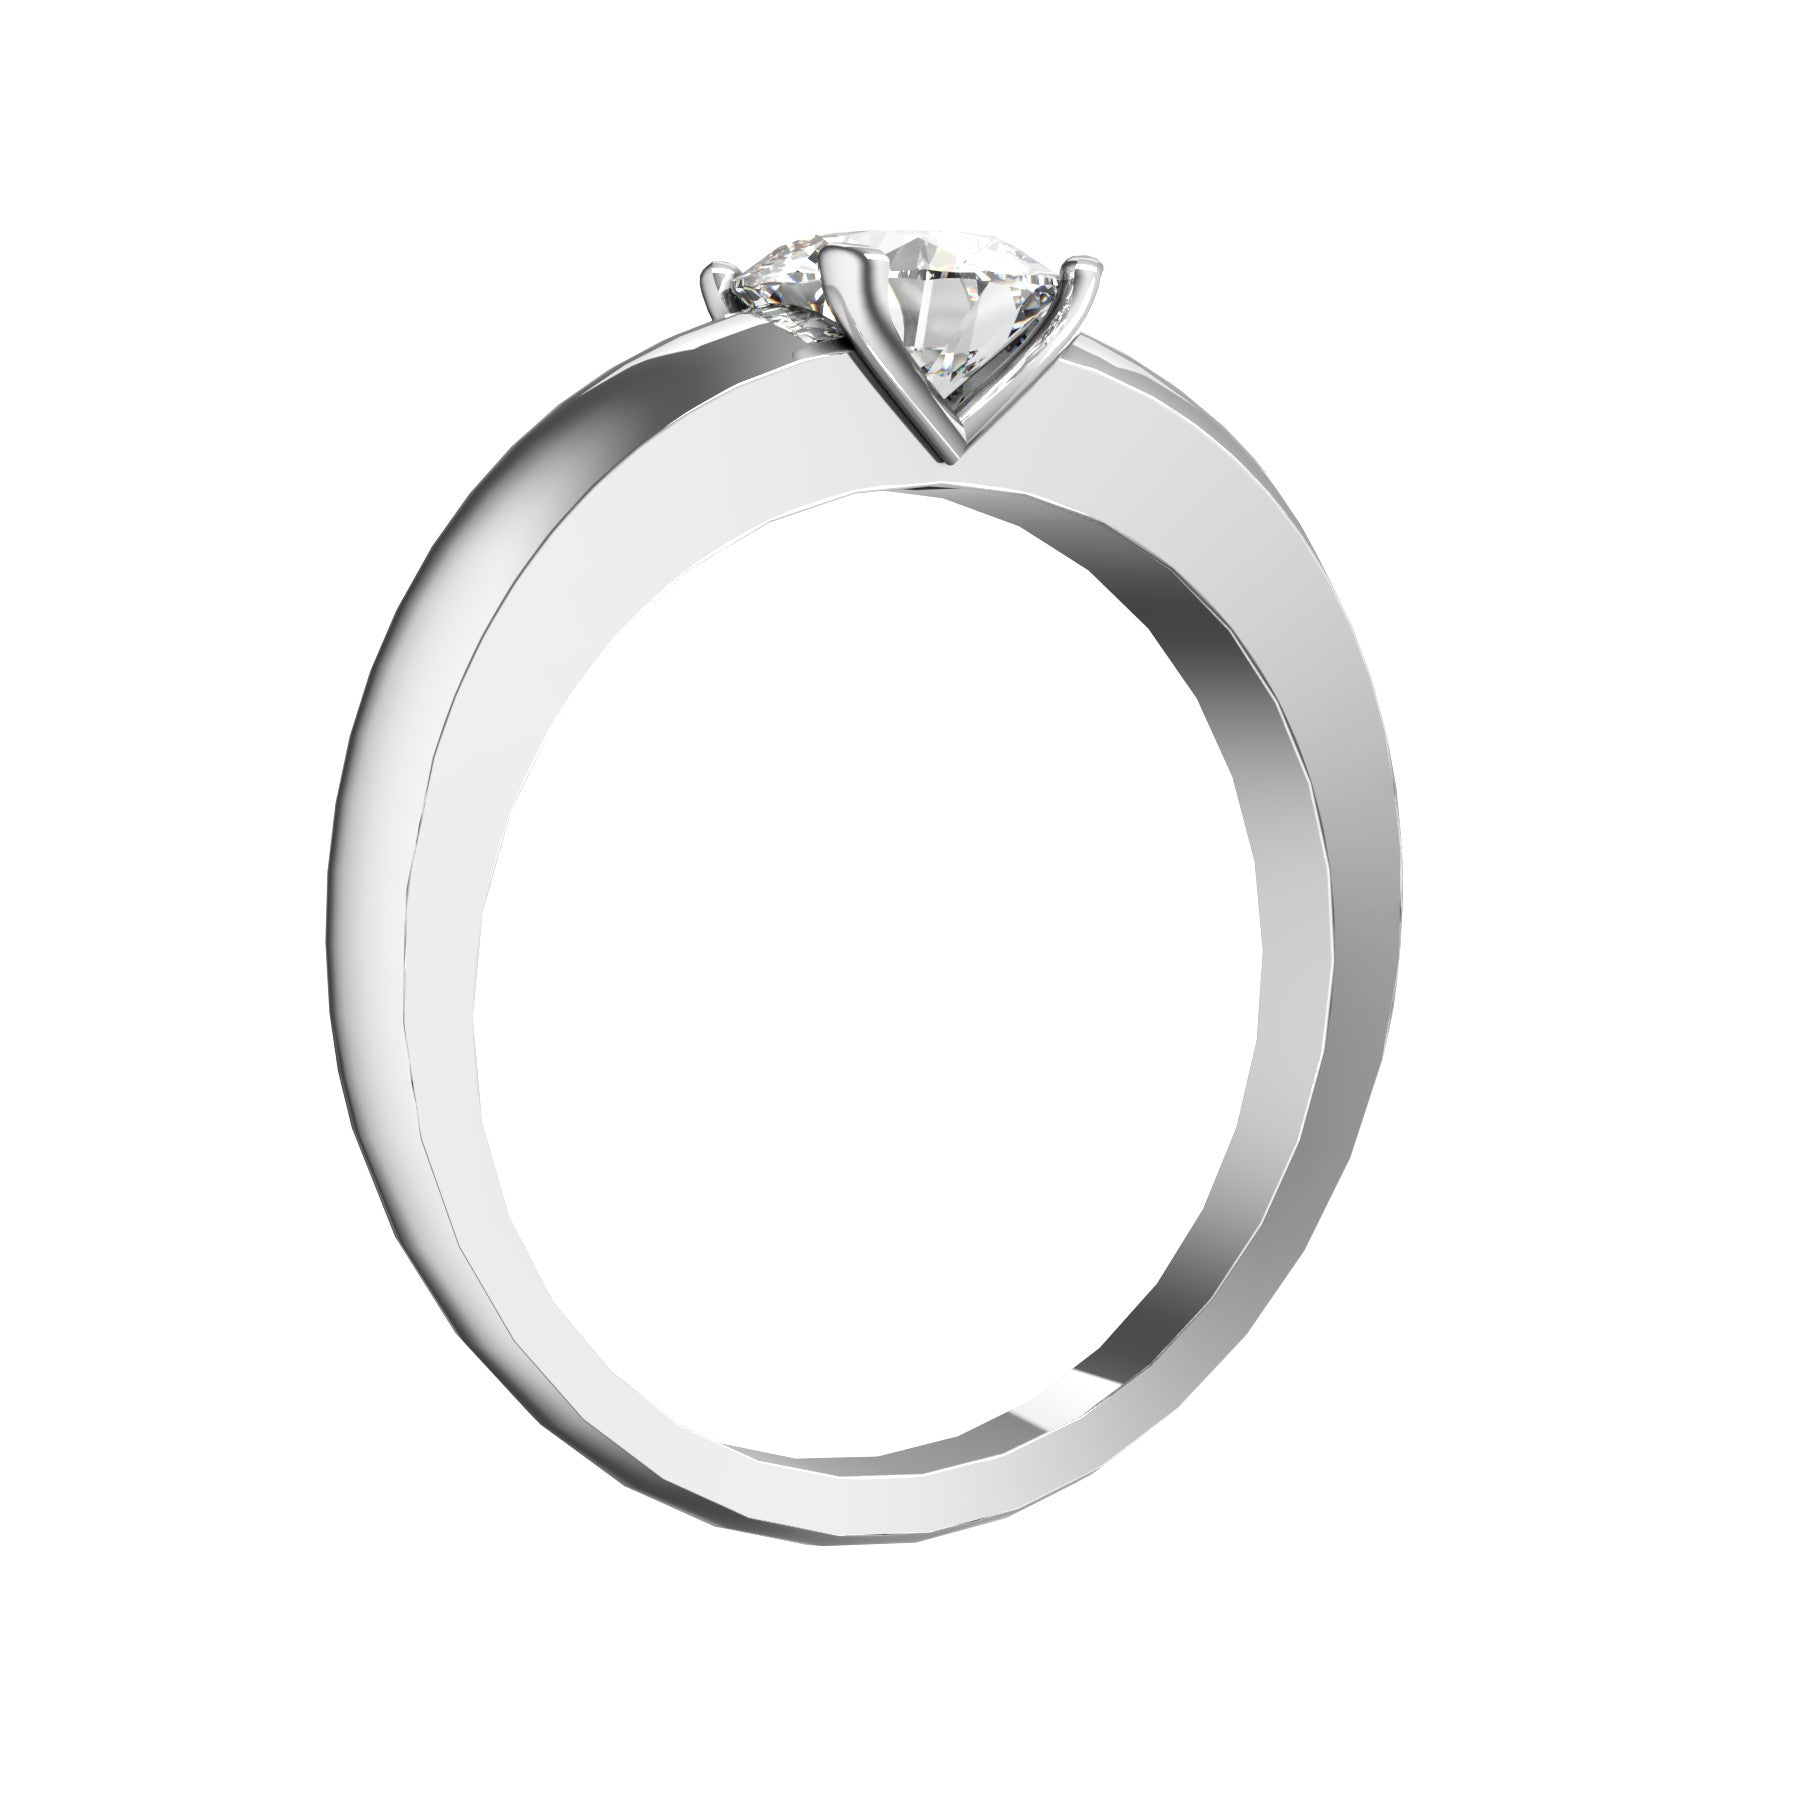 solitaire ring, 18 k white gold, 0,70 ct round natural diamond, weight about 4,1 g, (0.14 oz)